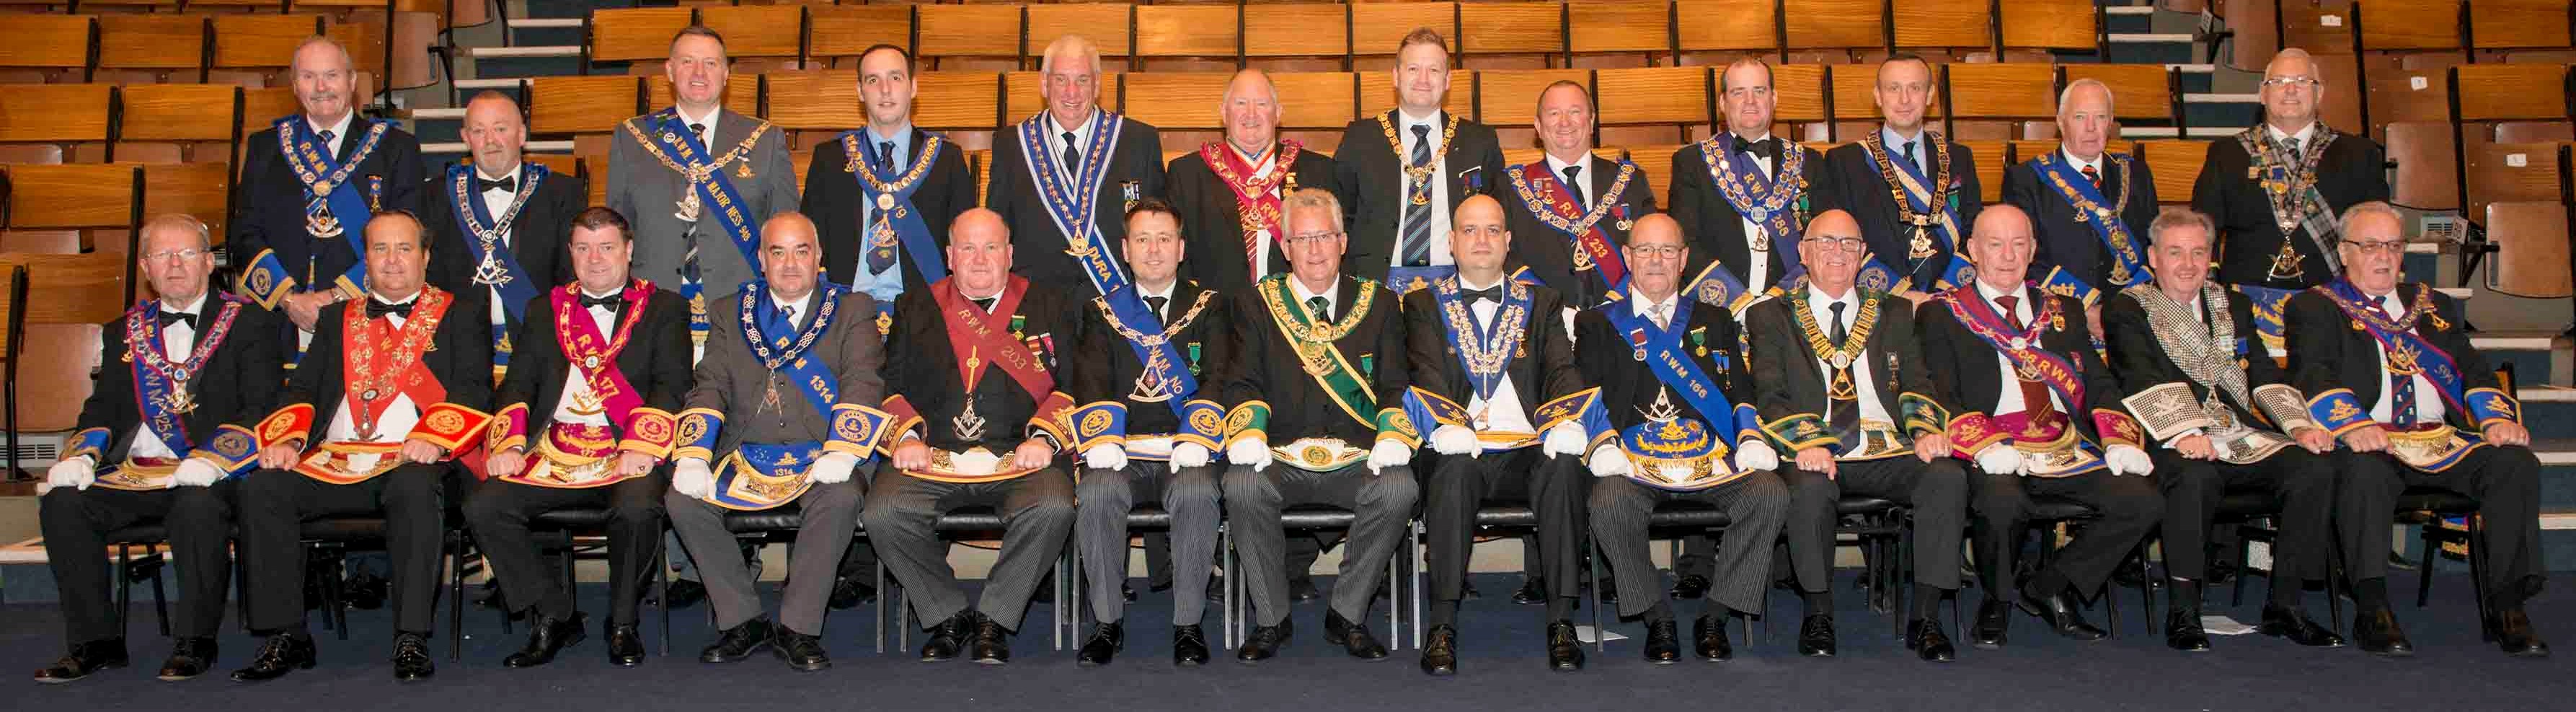 rwpgm-with-reigning-masters